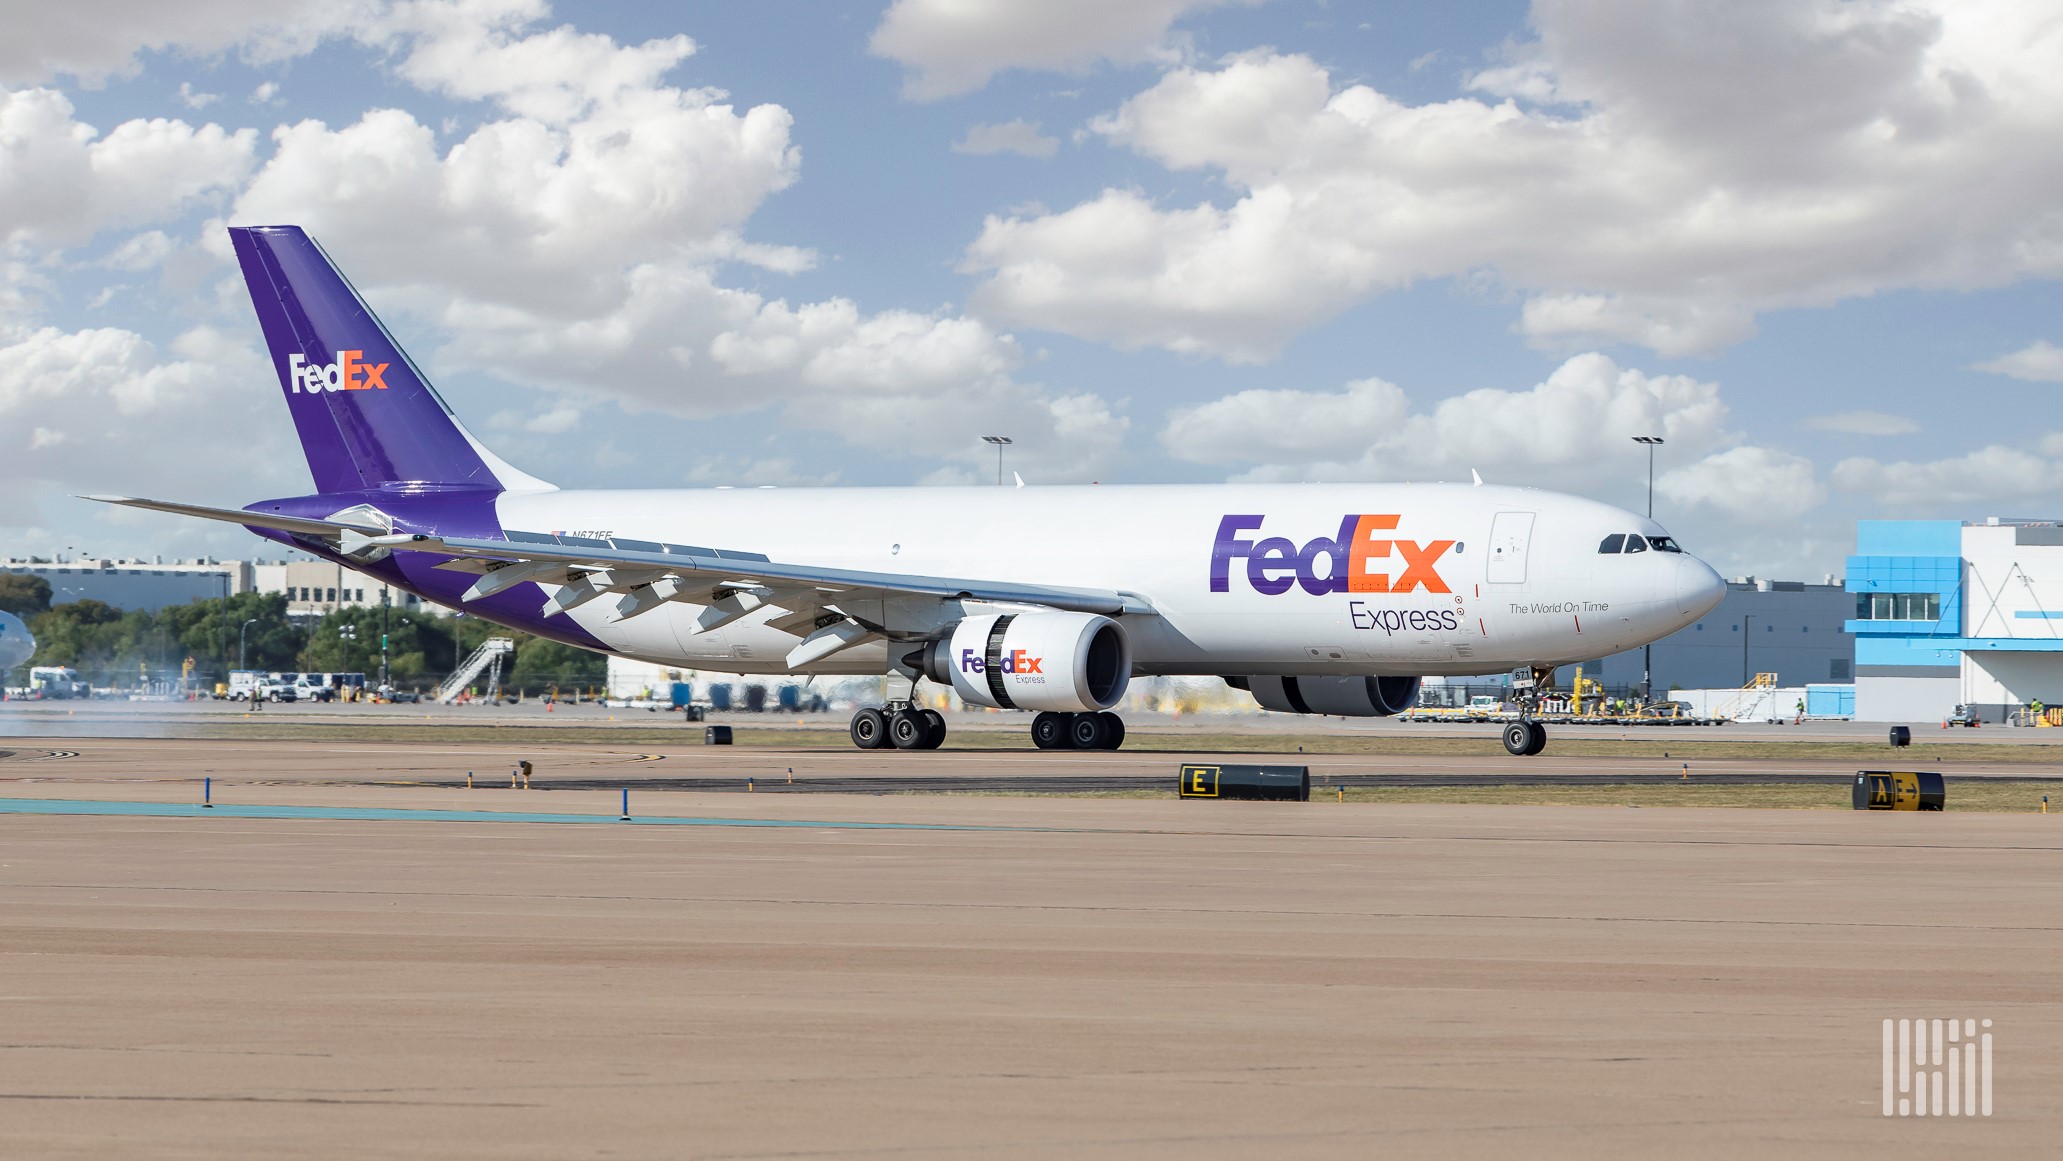 A white and purple FedEx jet on the ground.